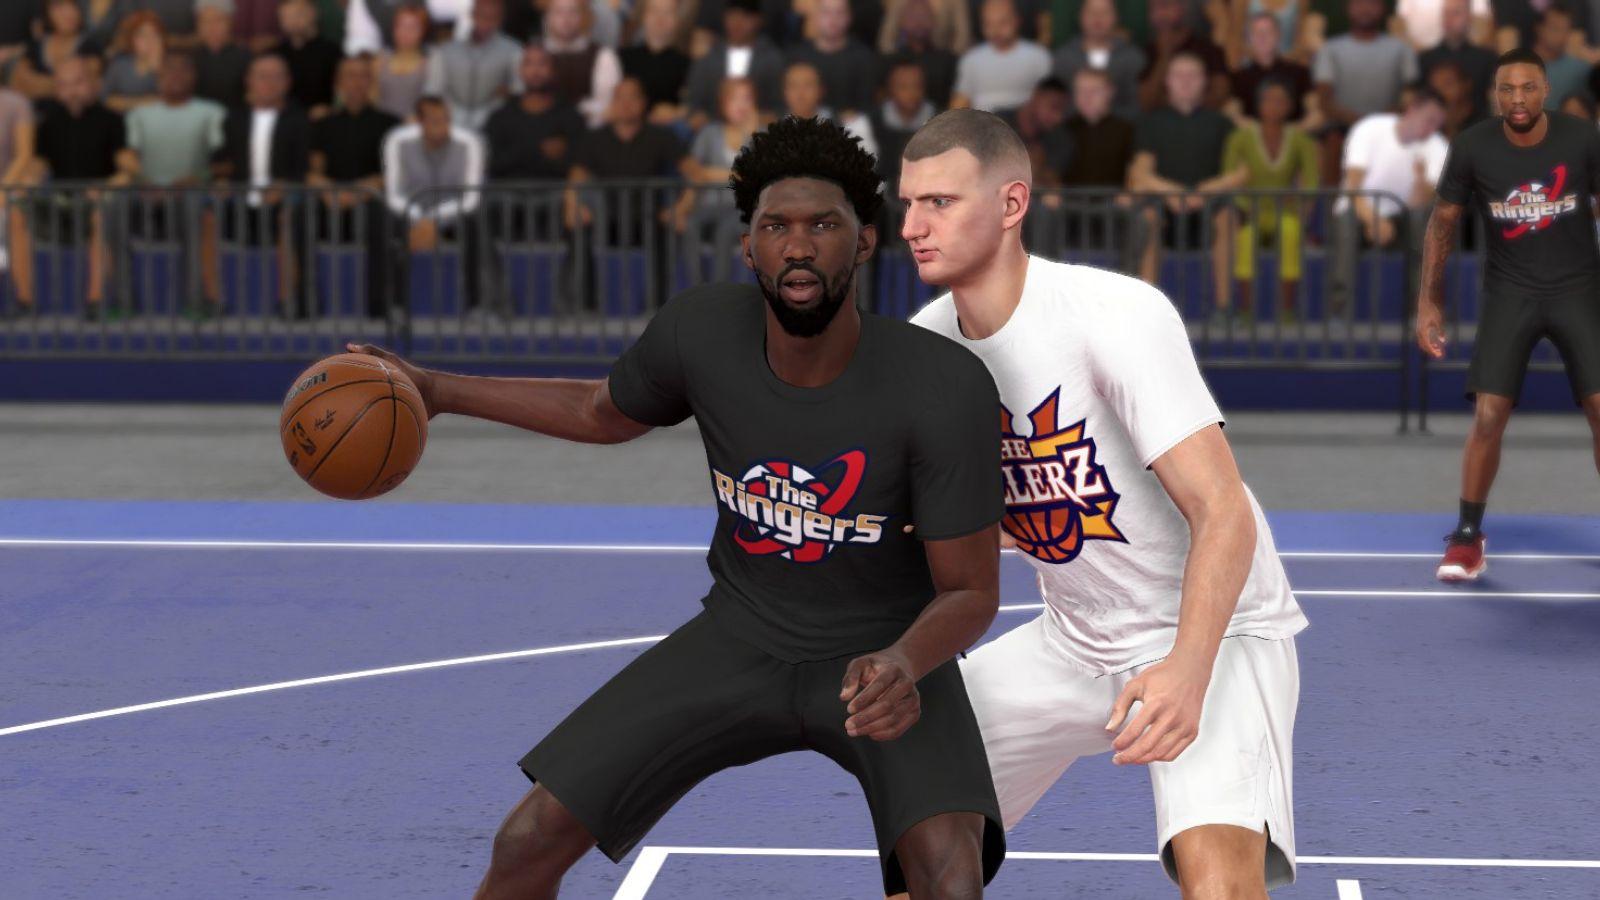 Why is NBA 2K24 one of the worst reviewed games on Steam?